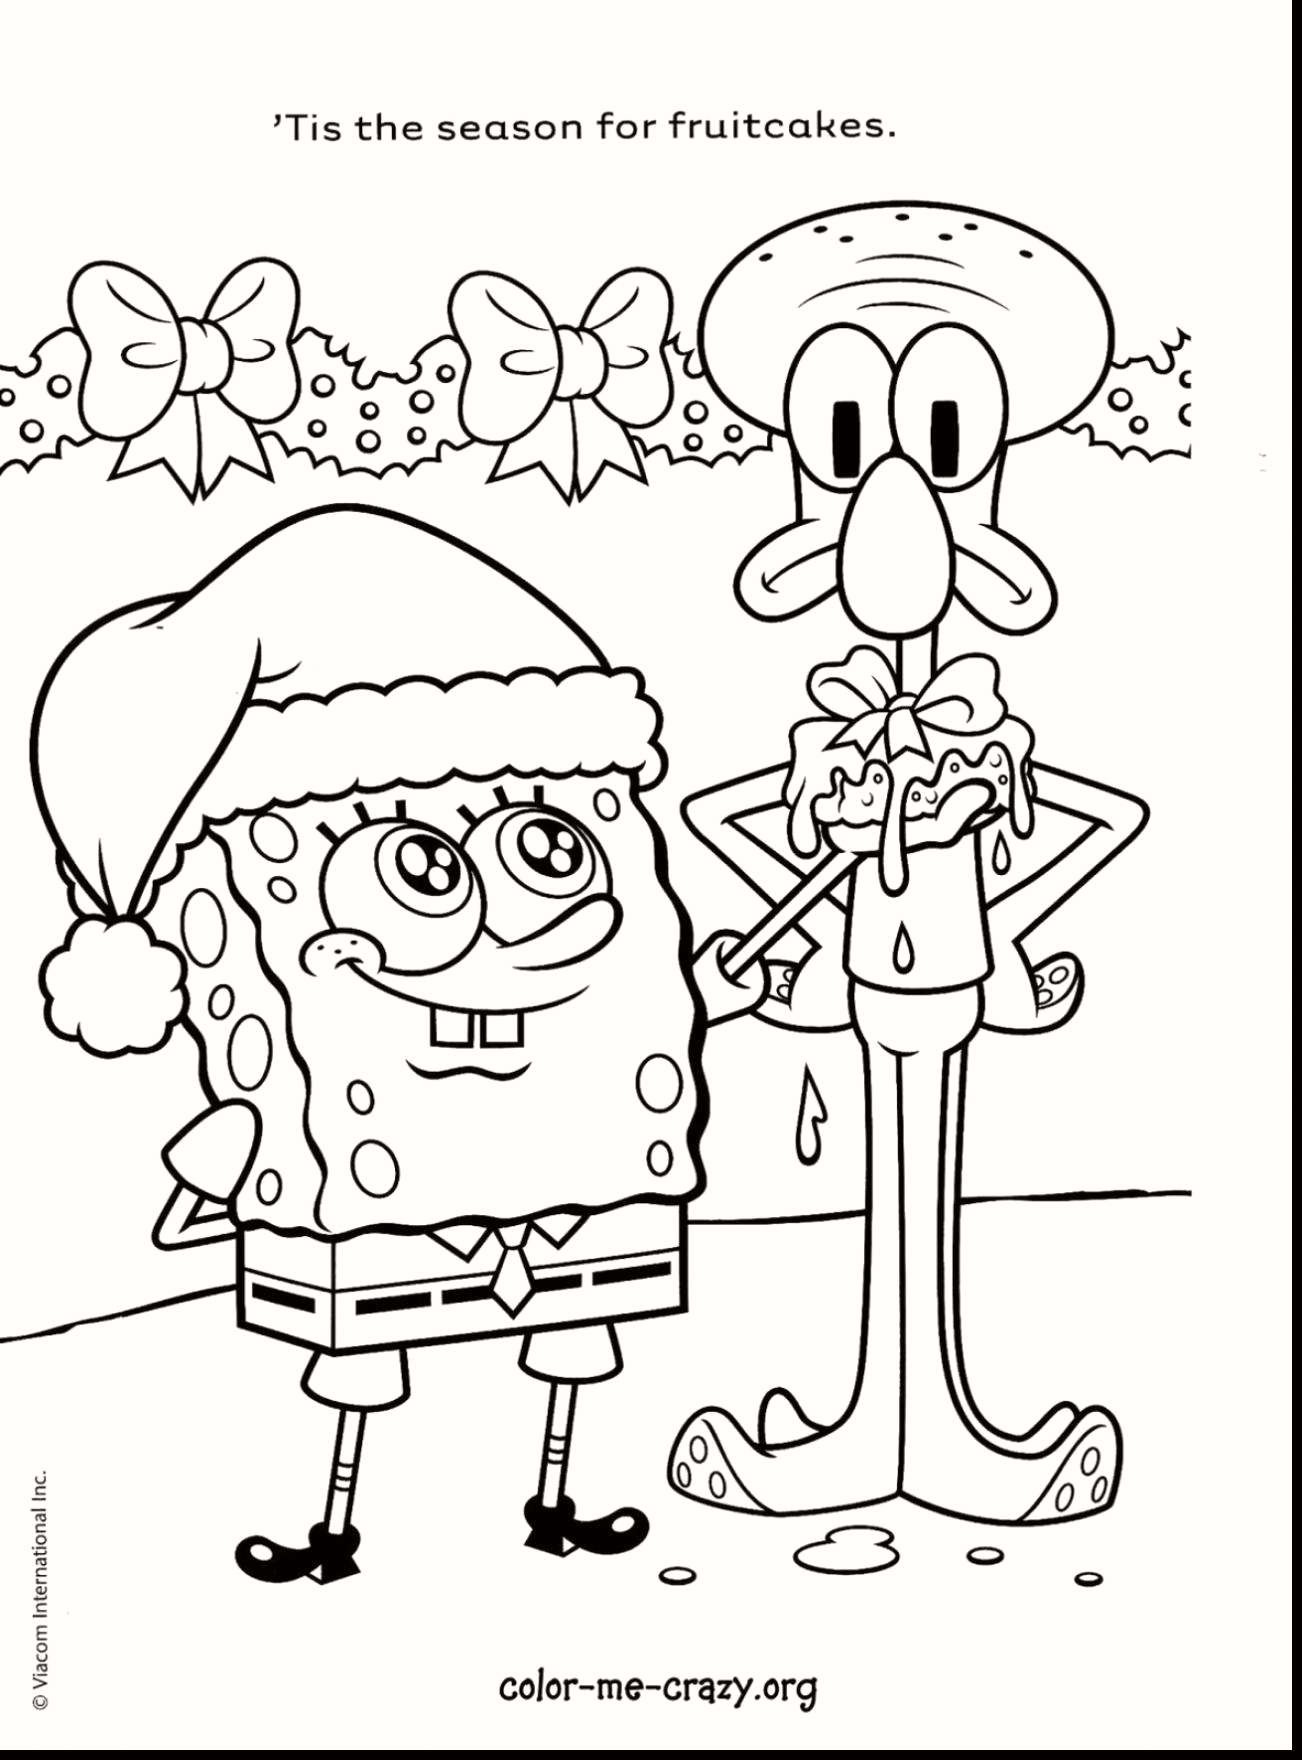 Spongebob Christmas Coloring Pages Awesome Petitive Holiday Coloring Pages for Adults Unknown 35 Lovely Spongebob